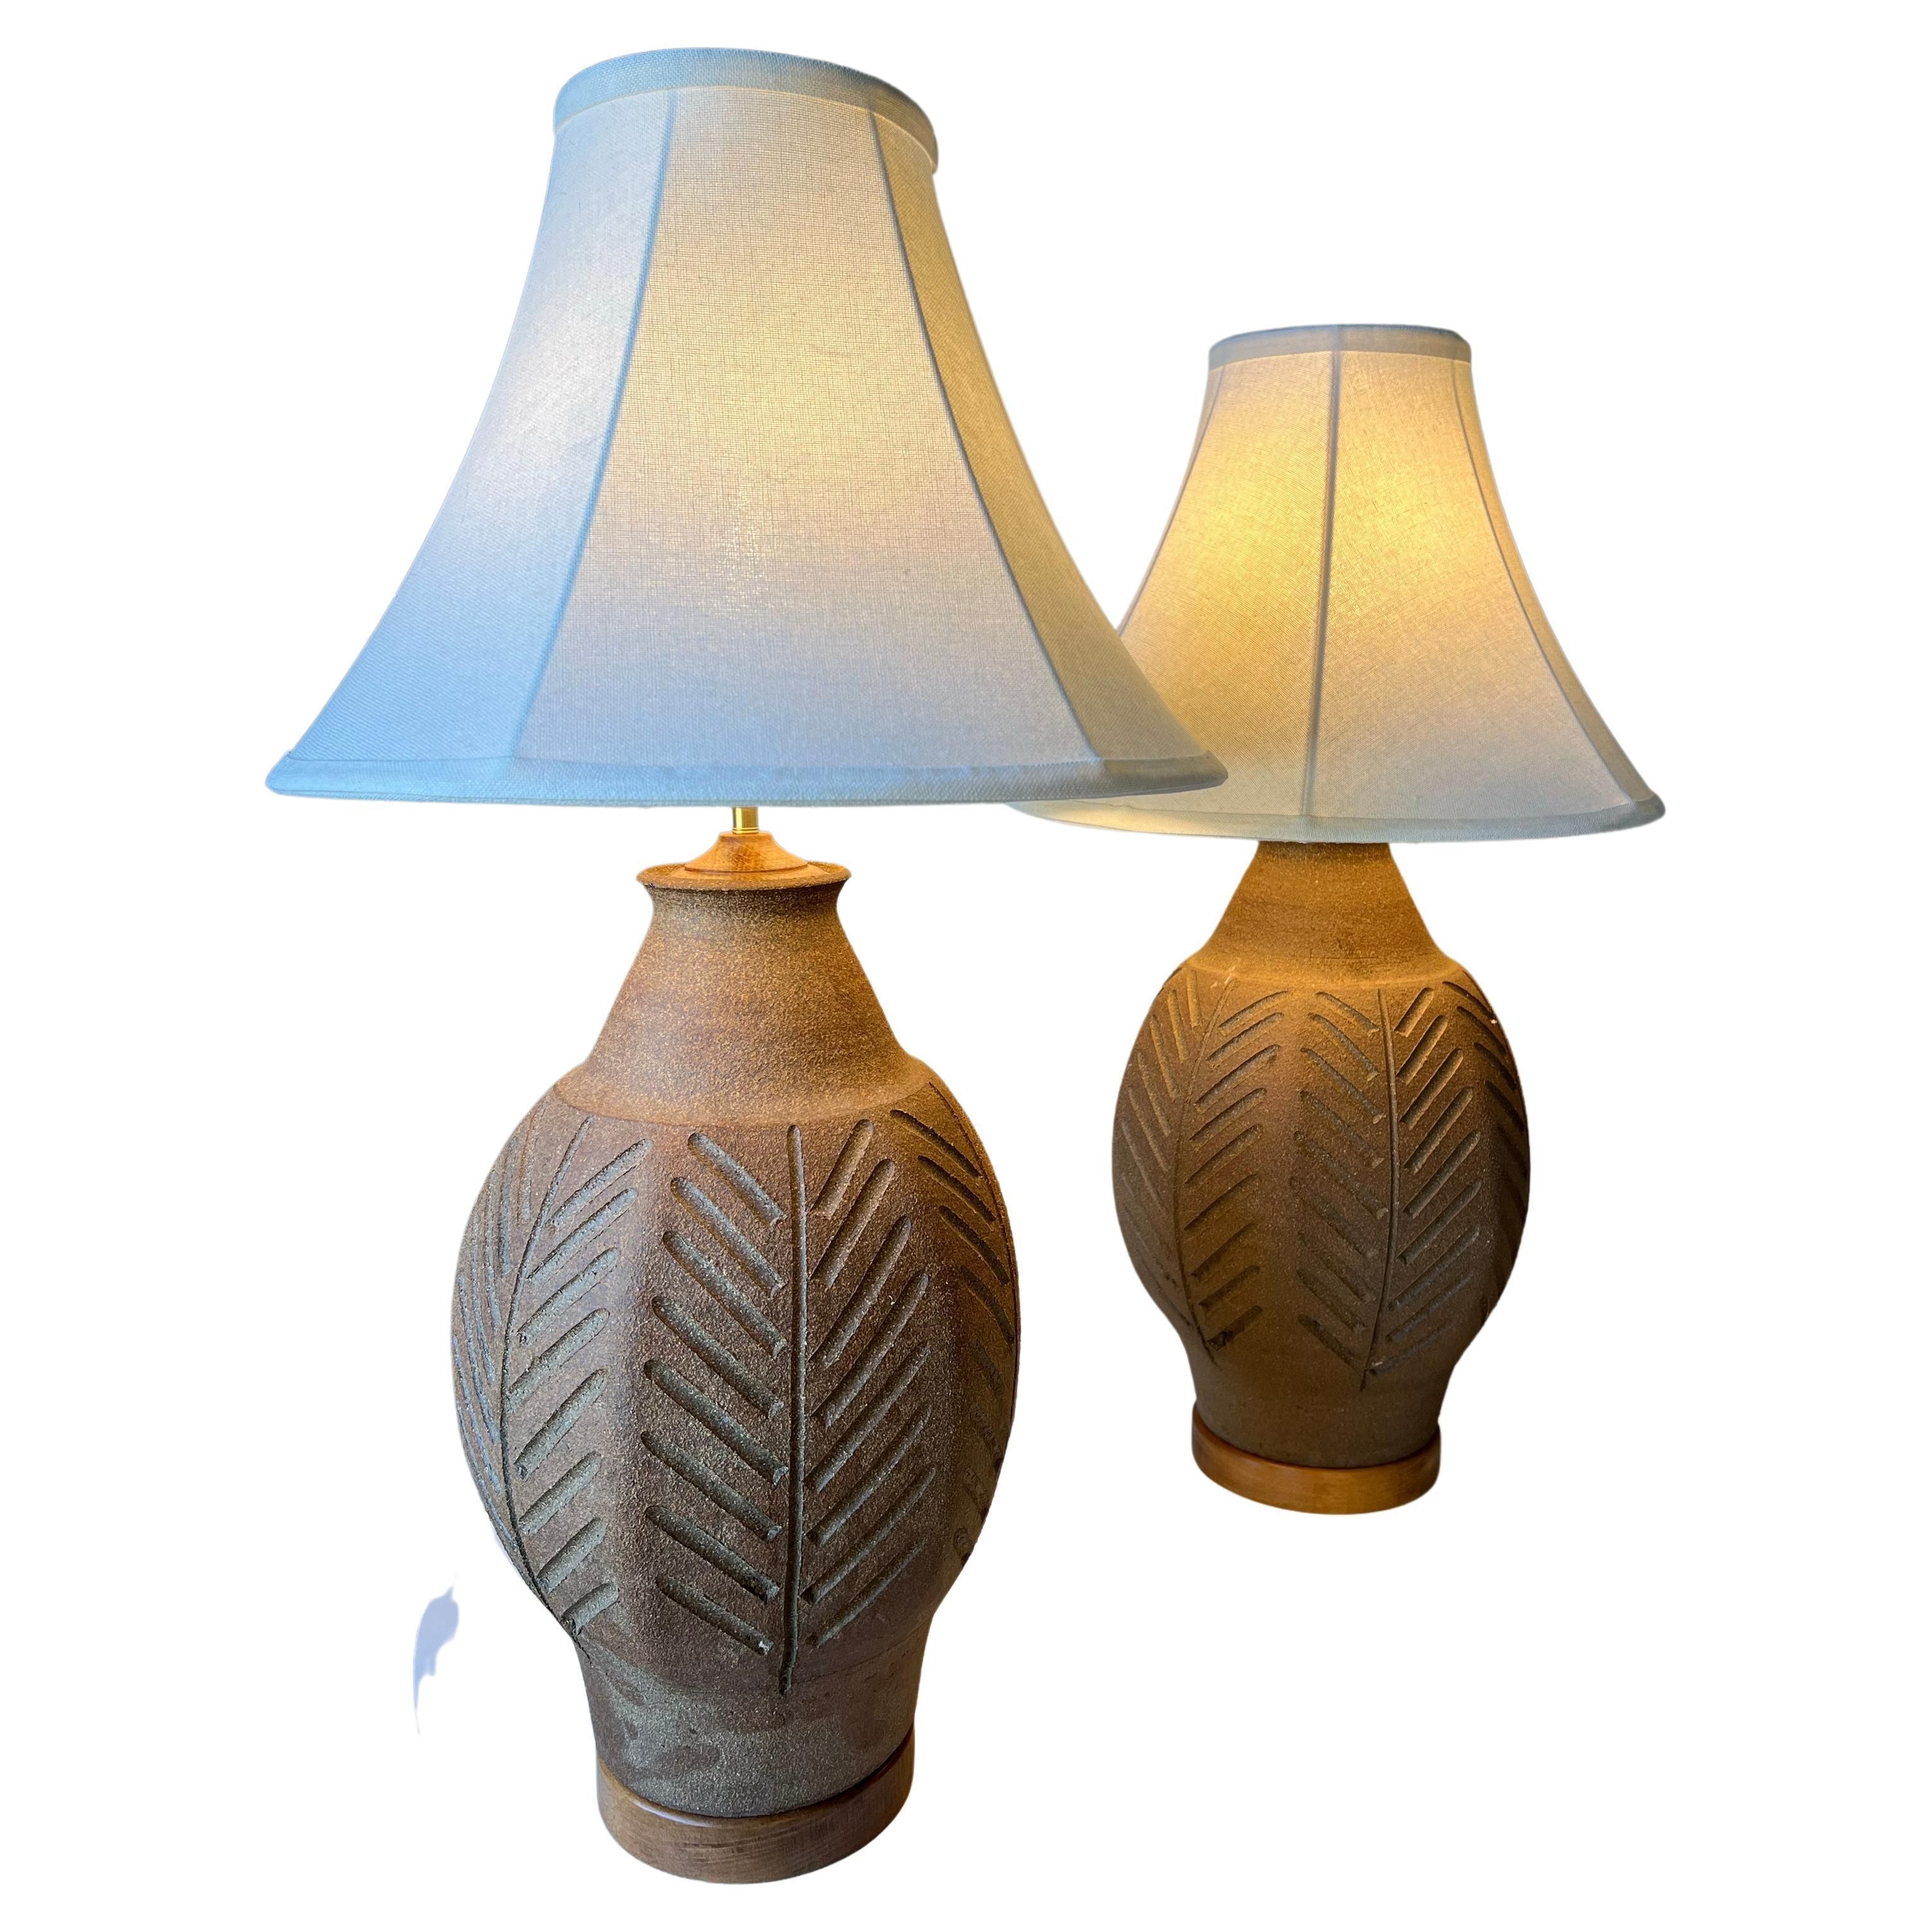 Pair of Vintage Fluted Stoneware Table Lamps by Brent Bennett